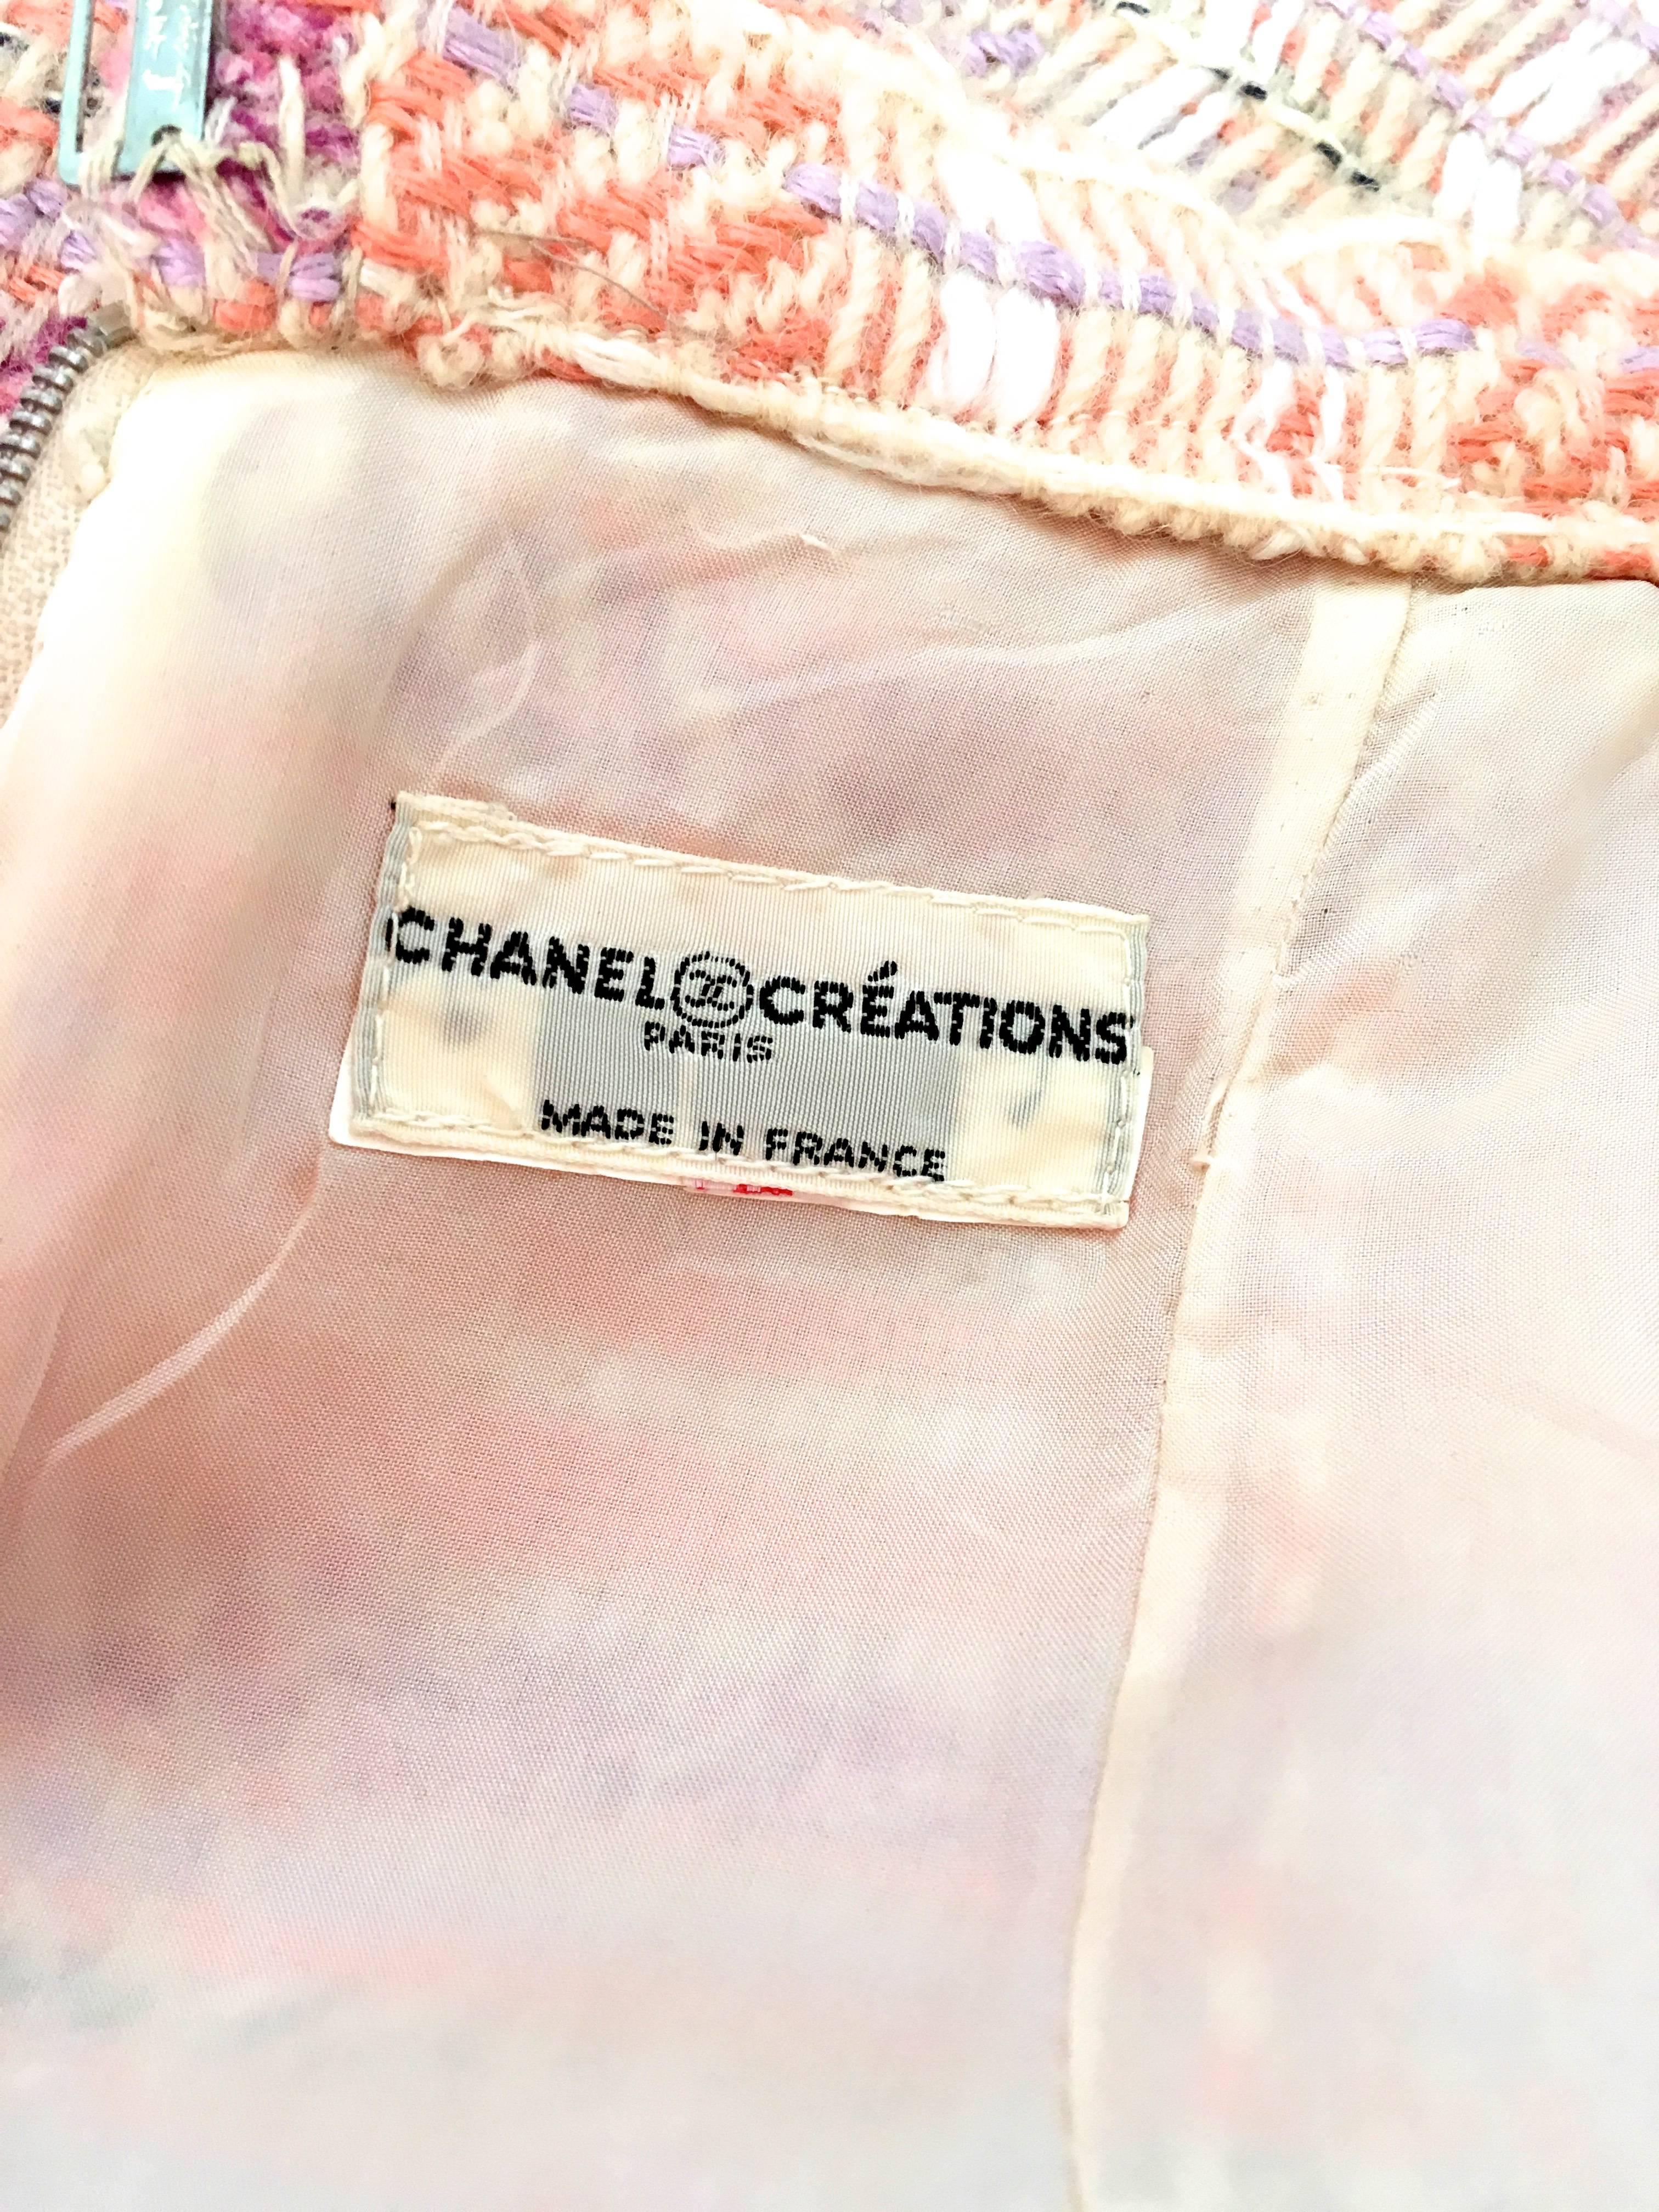 Presented here is an example of Chanel Creations at its finest. This vintage suit is a beautiful color combination of cream, peach, lilac and a little bit of a dark shade of purple with cream and white threading throughout with minor hints of black